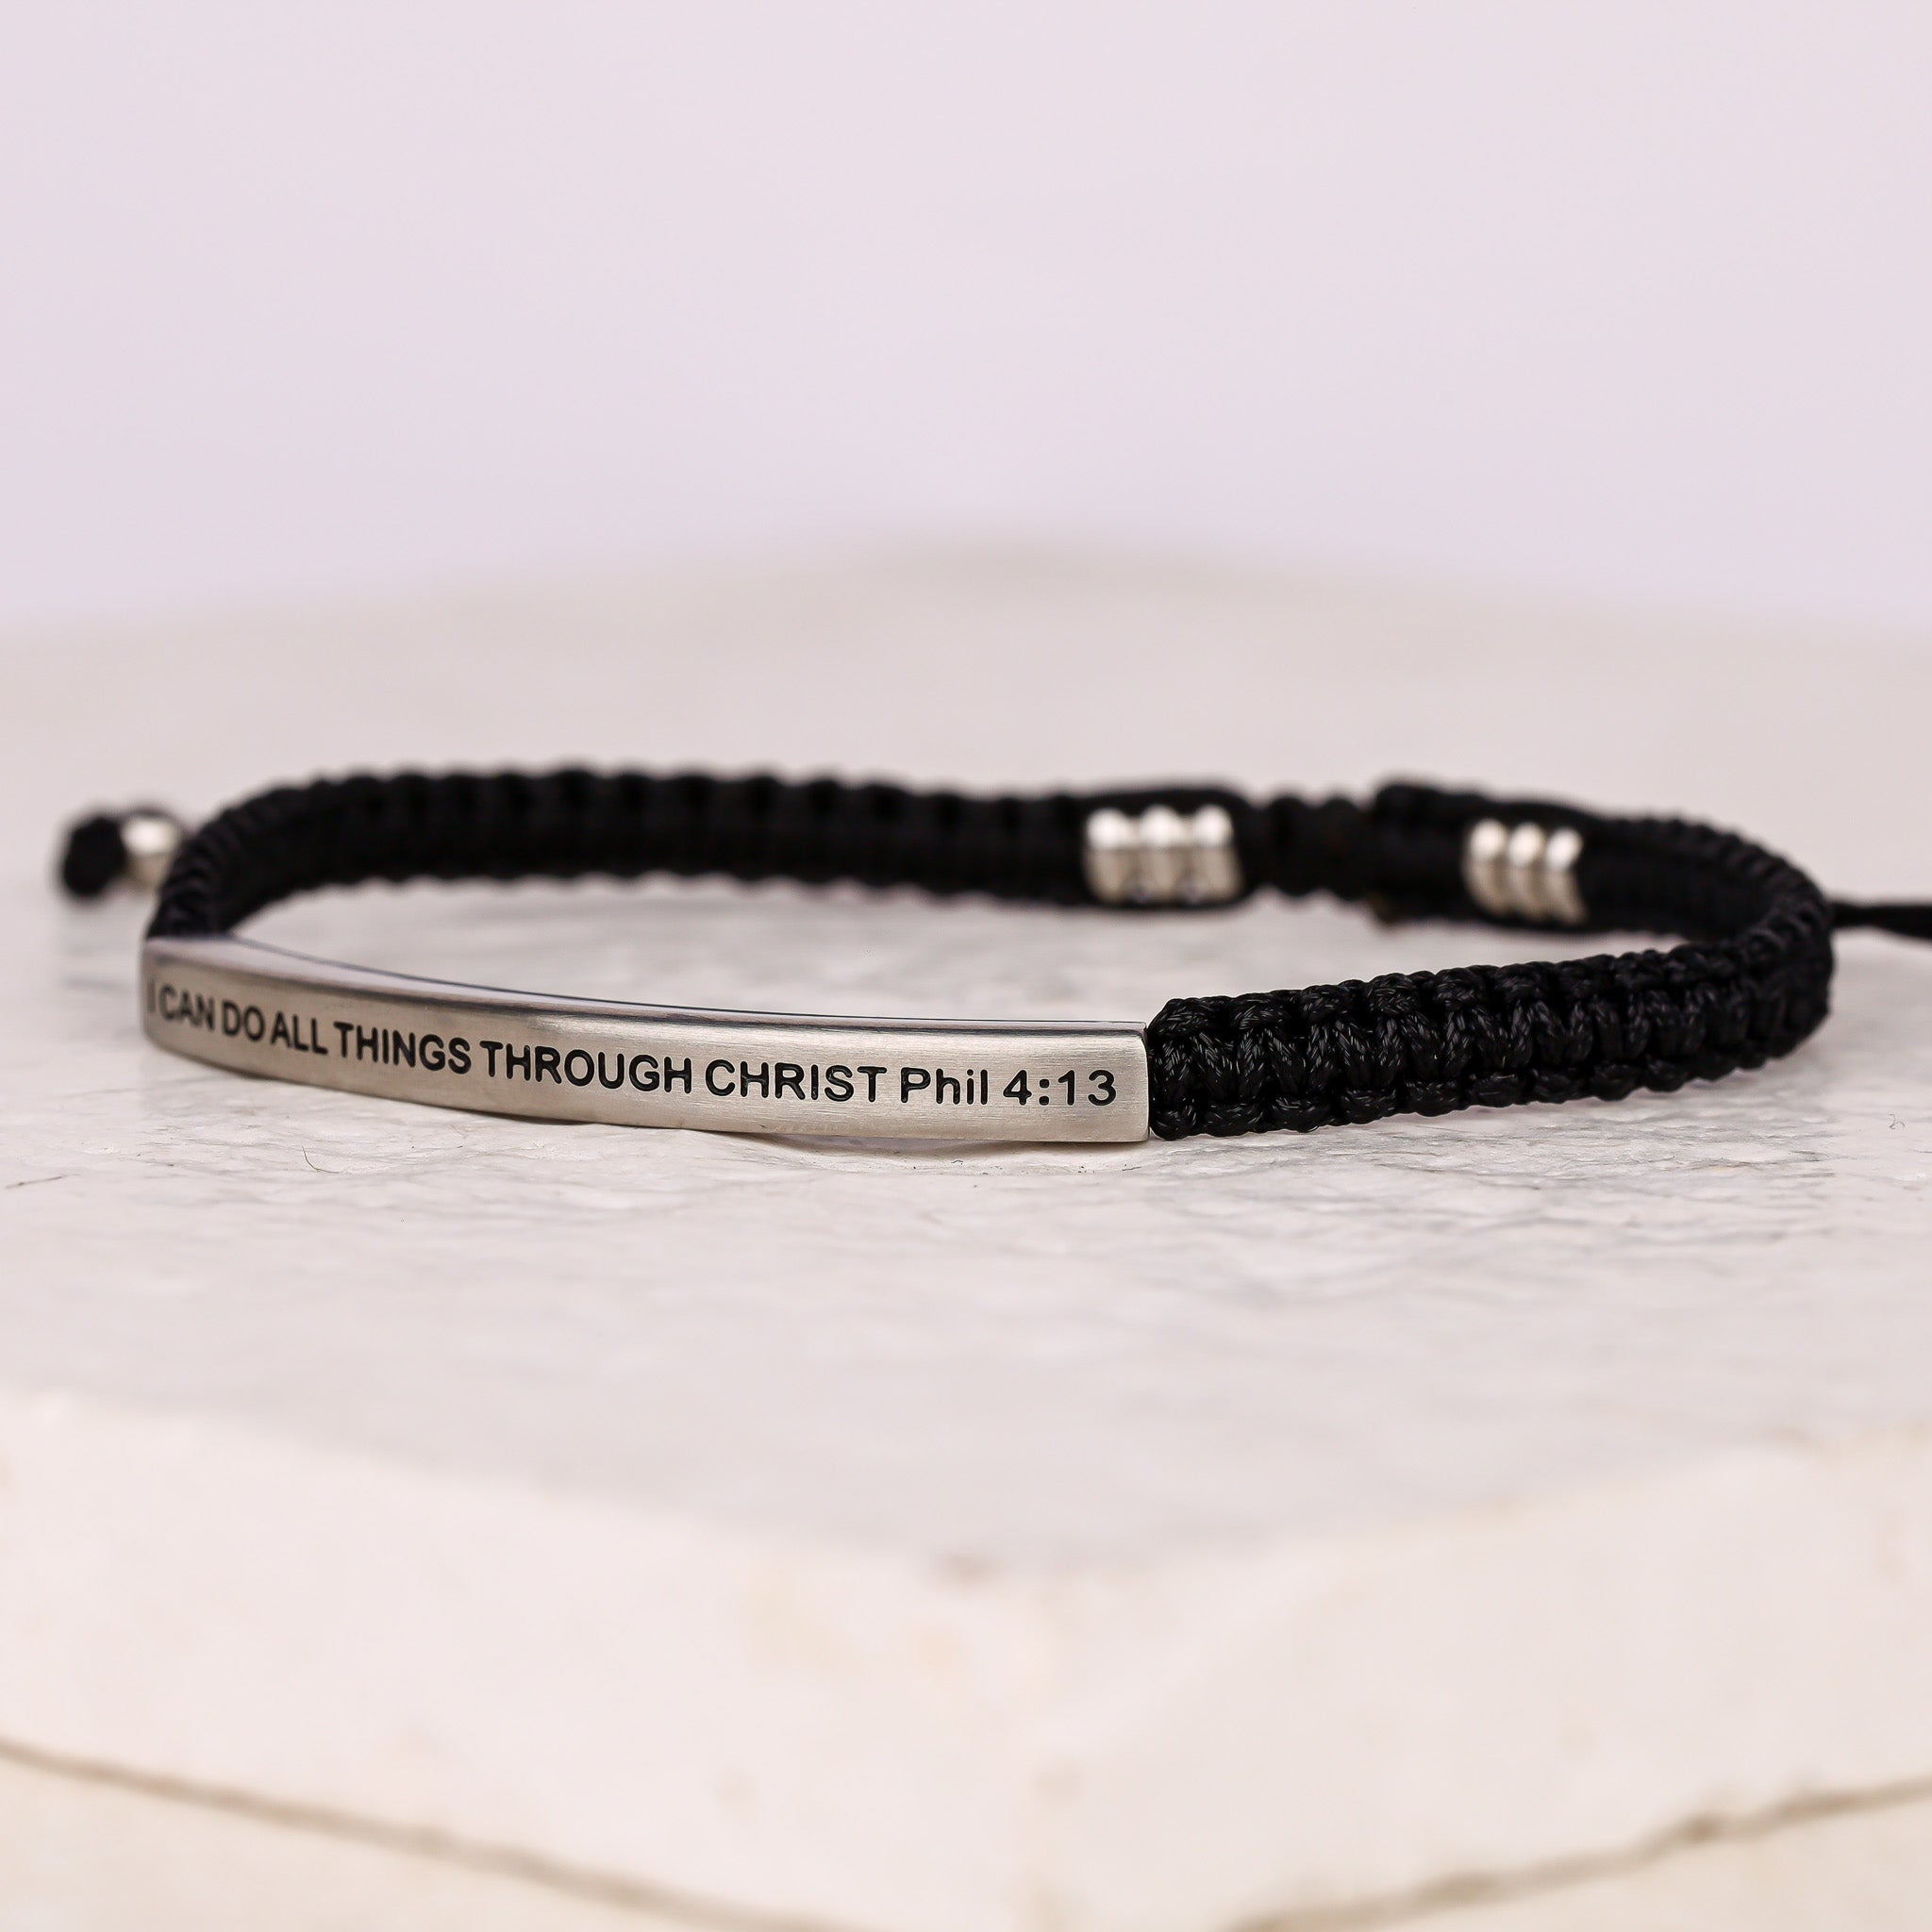 I CAN DO ALL THINGS THROUGH CHRIST ROPE BRACELET - Inspiration Co.